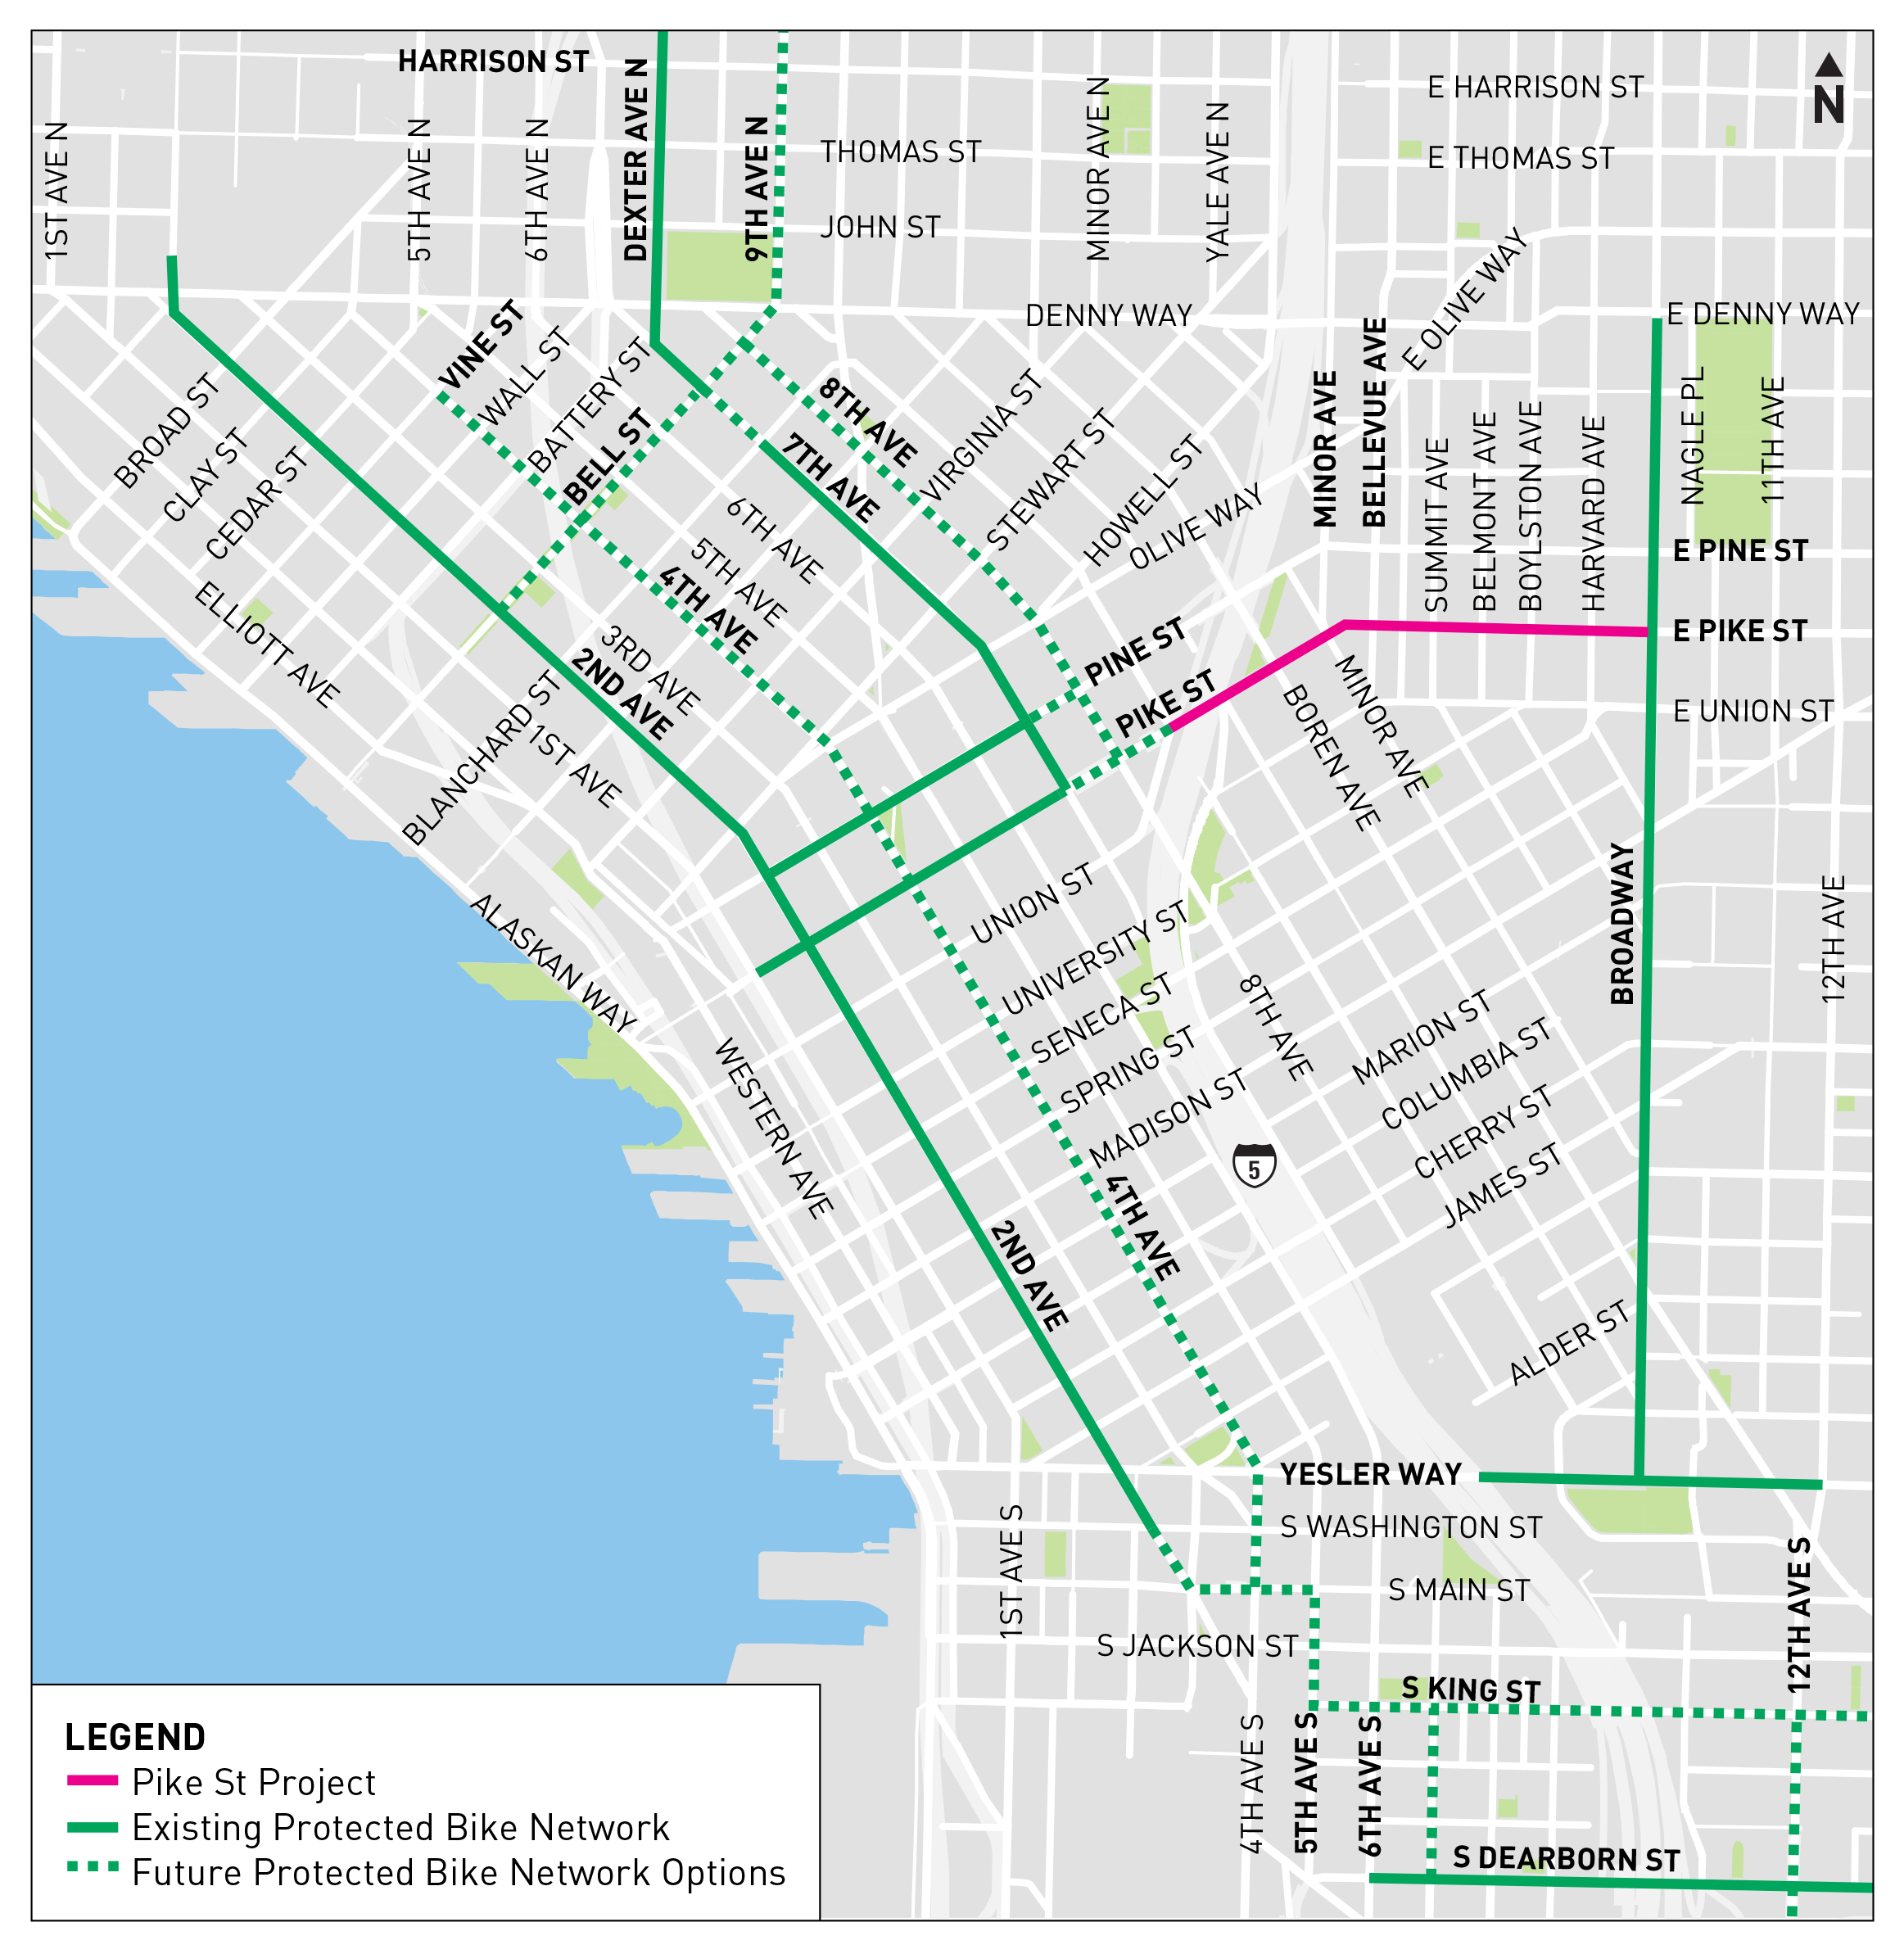 Context map showing Pike St Mobility Improvements project in relation to other Center City Bike Network projects